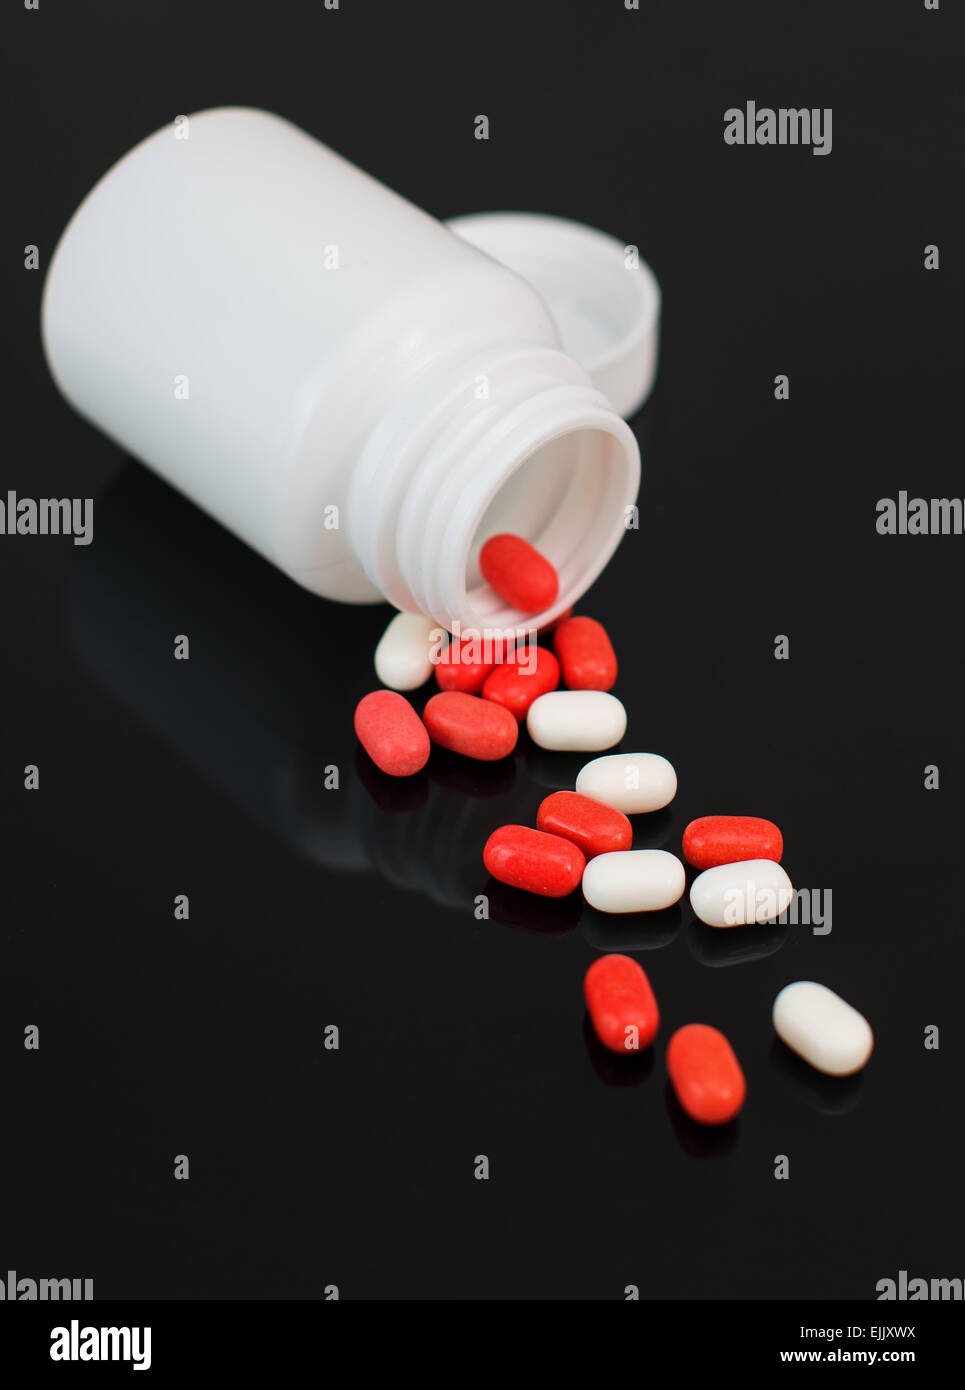 Red and white pills spilled from bottle. Stock Photo